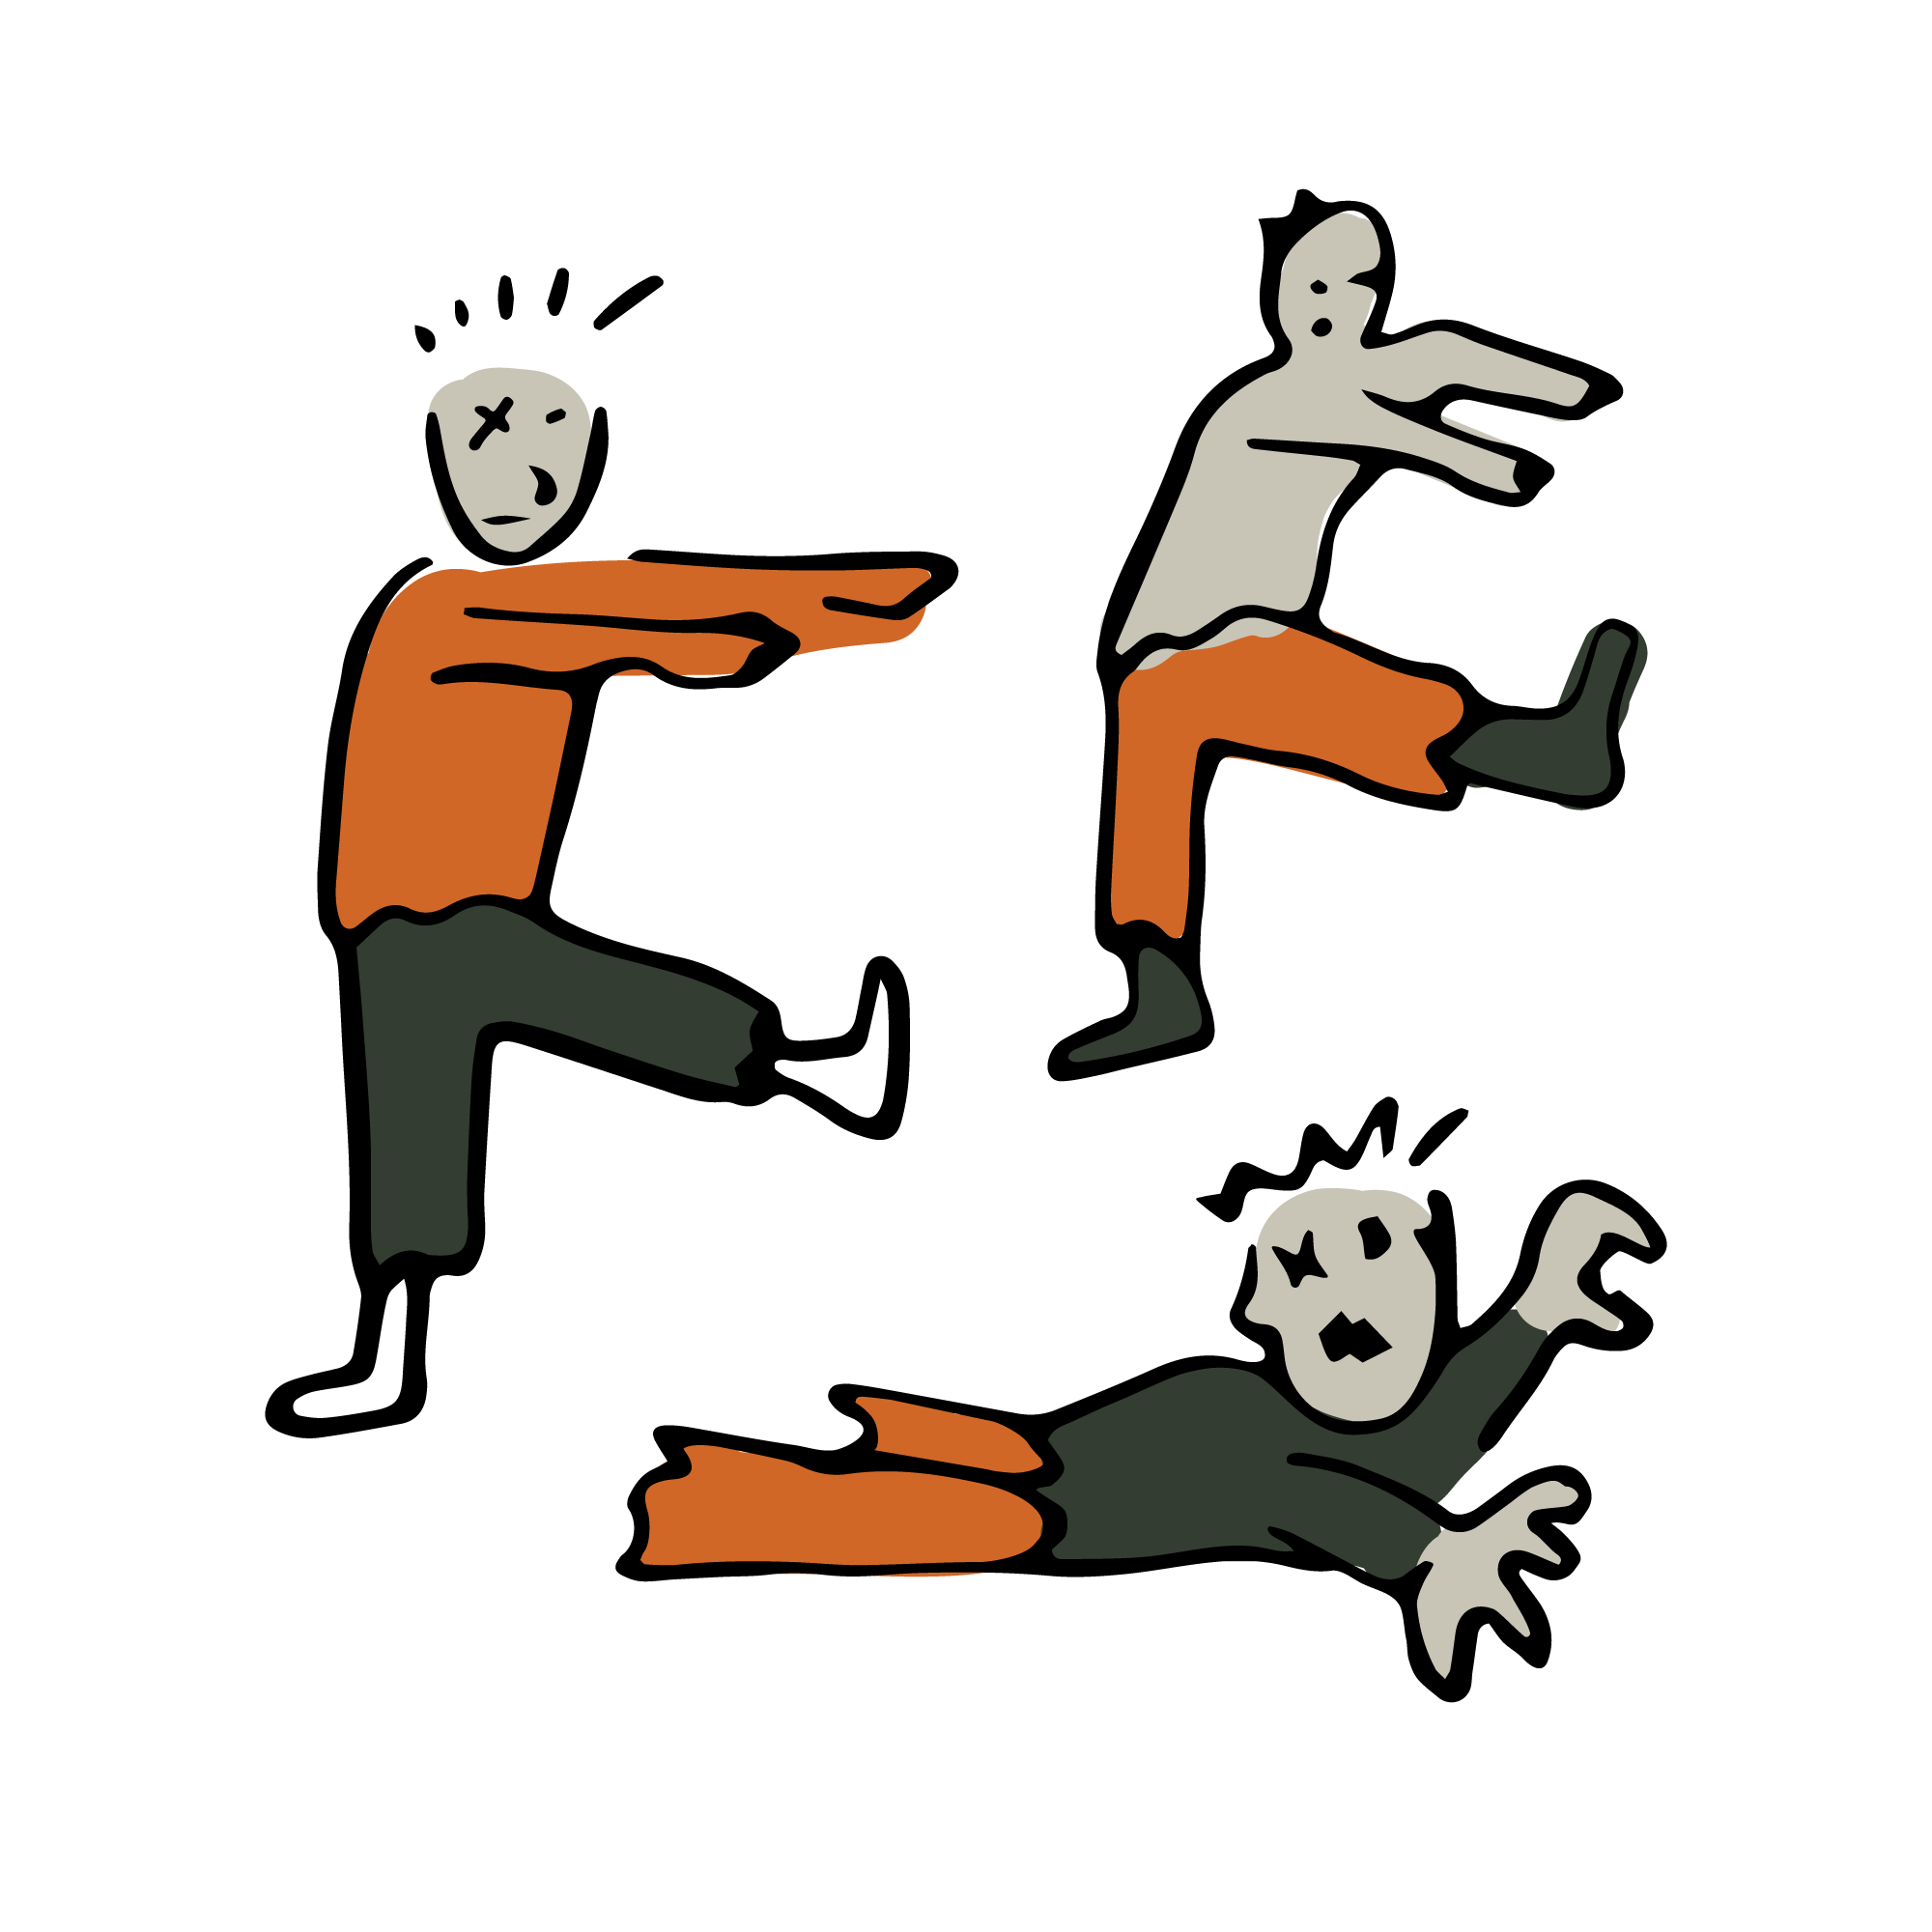 A group of three illustrated zombies. Two walk with their arms out while one crawls. Their mouths are open and they are hungry.